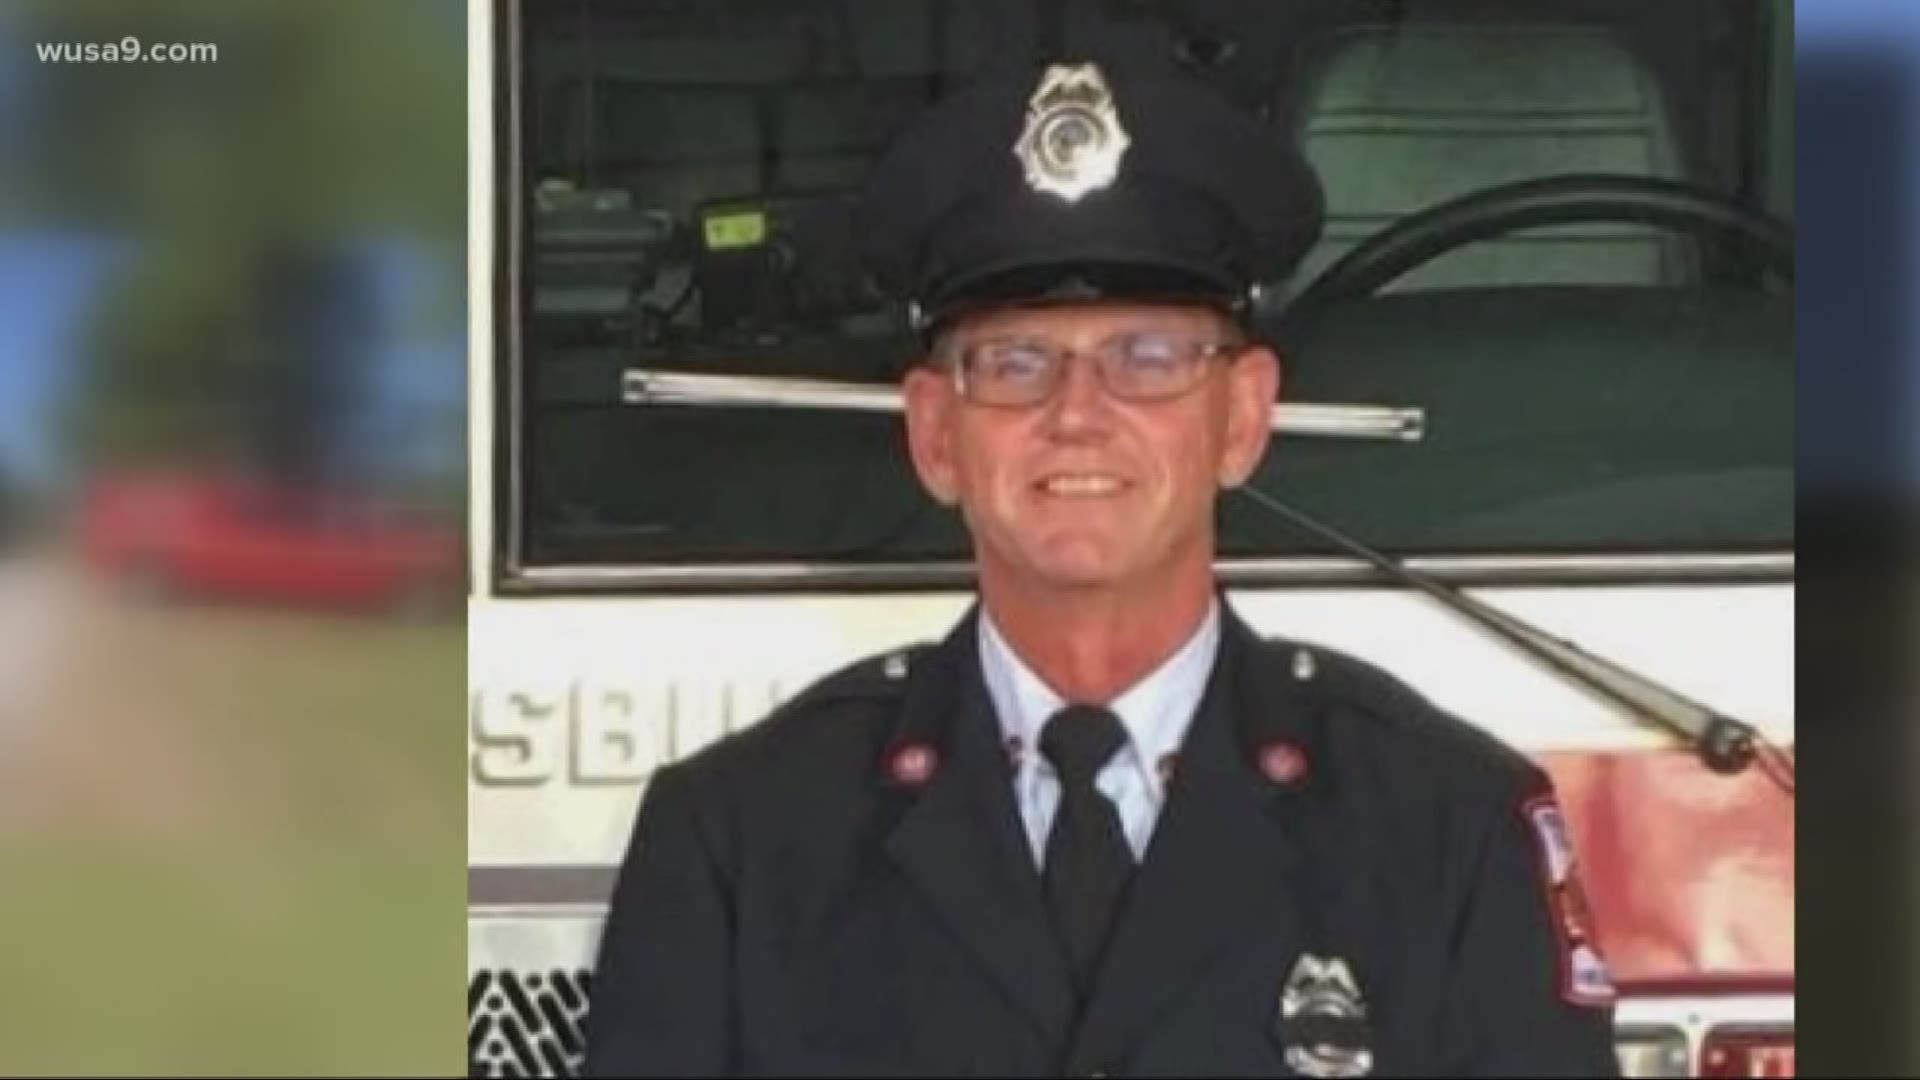 The career firefighter died Tuesday after a tractor incident and a rescue that took place deep in a ravine.